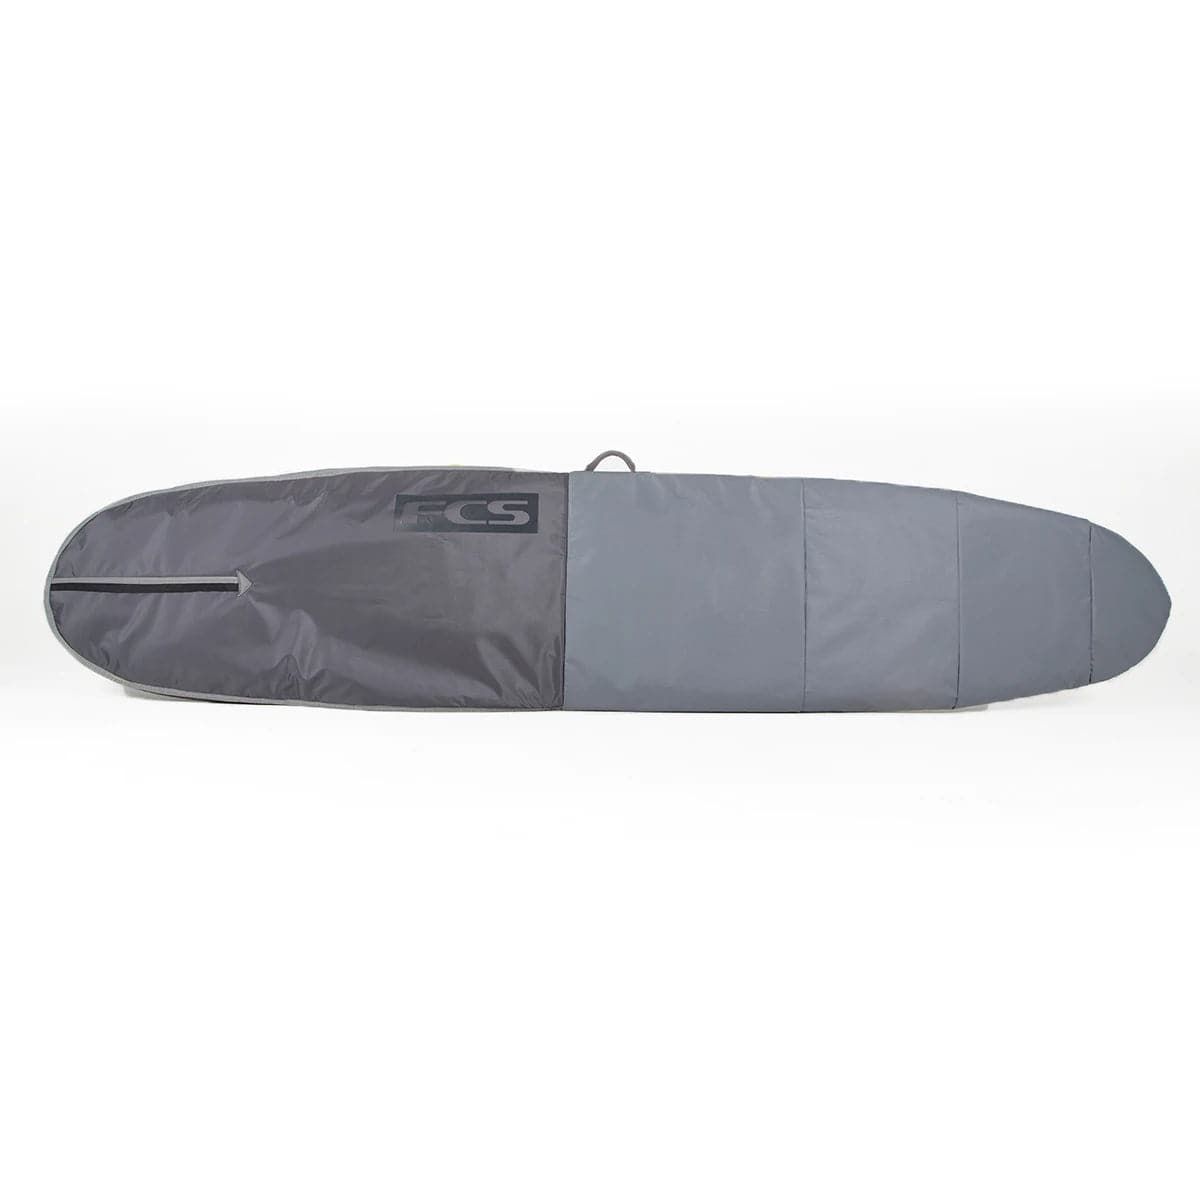 Featuring the SUP Dayrunner Bag 10'6 sup accessory, sup fin manufactured by FCS shown here from a fifth angle.